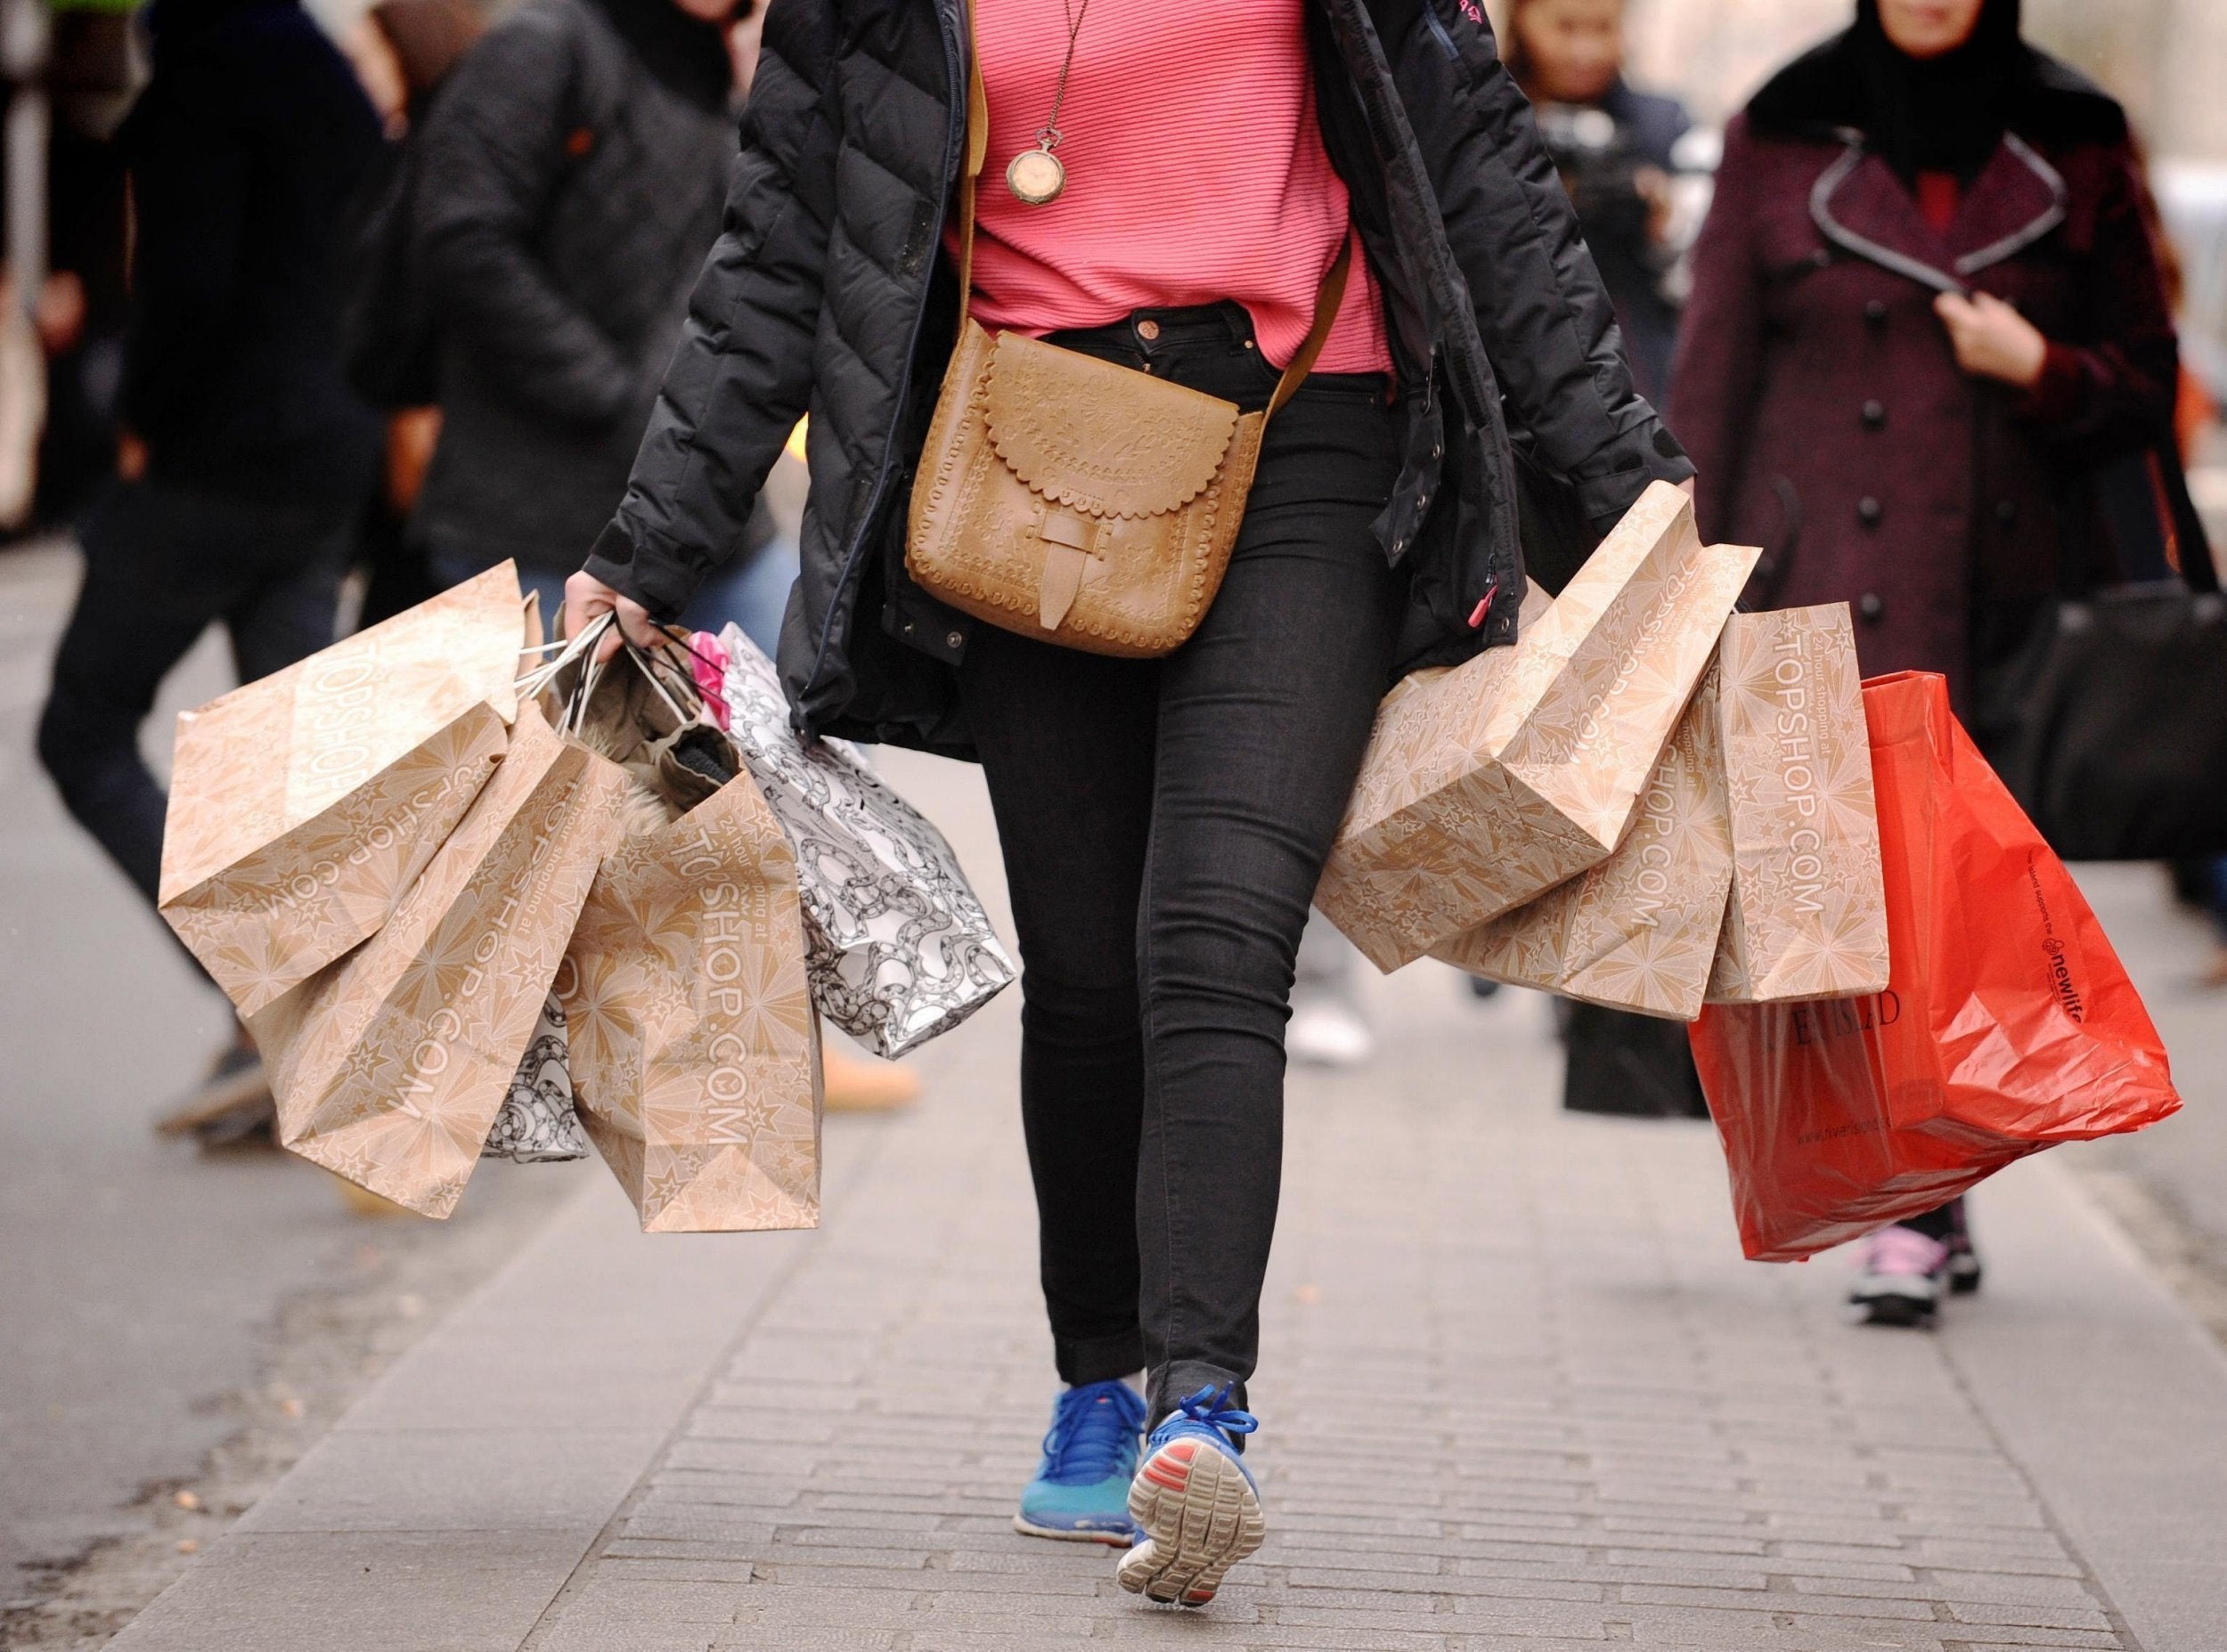 An endangered species? Shoppers are increasingly staying home and ordering online